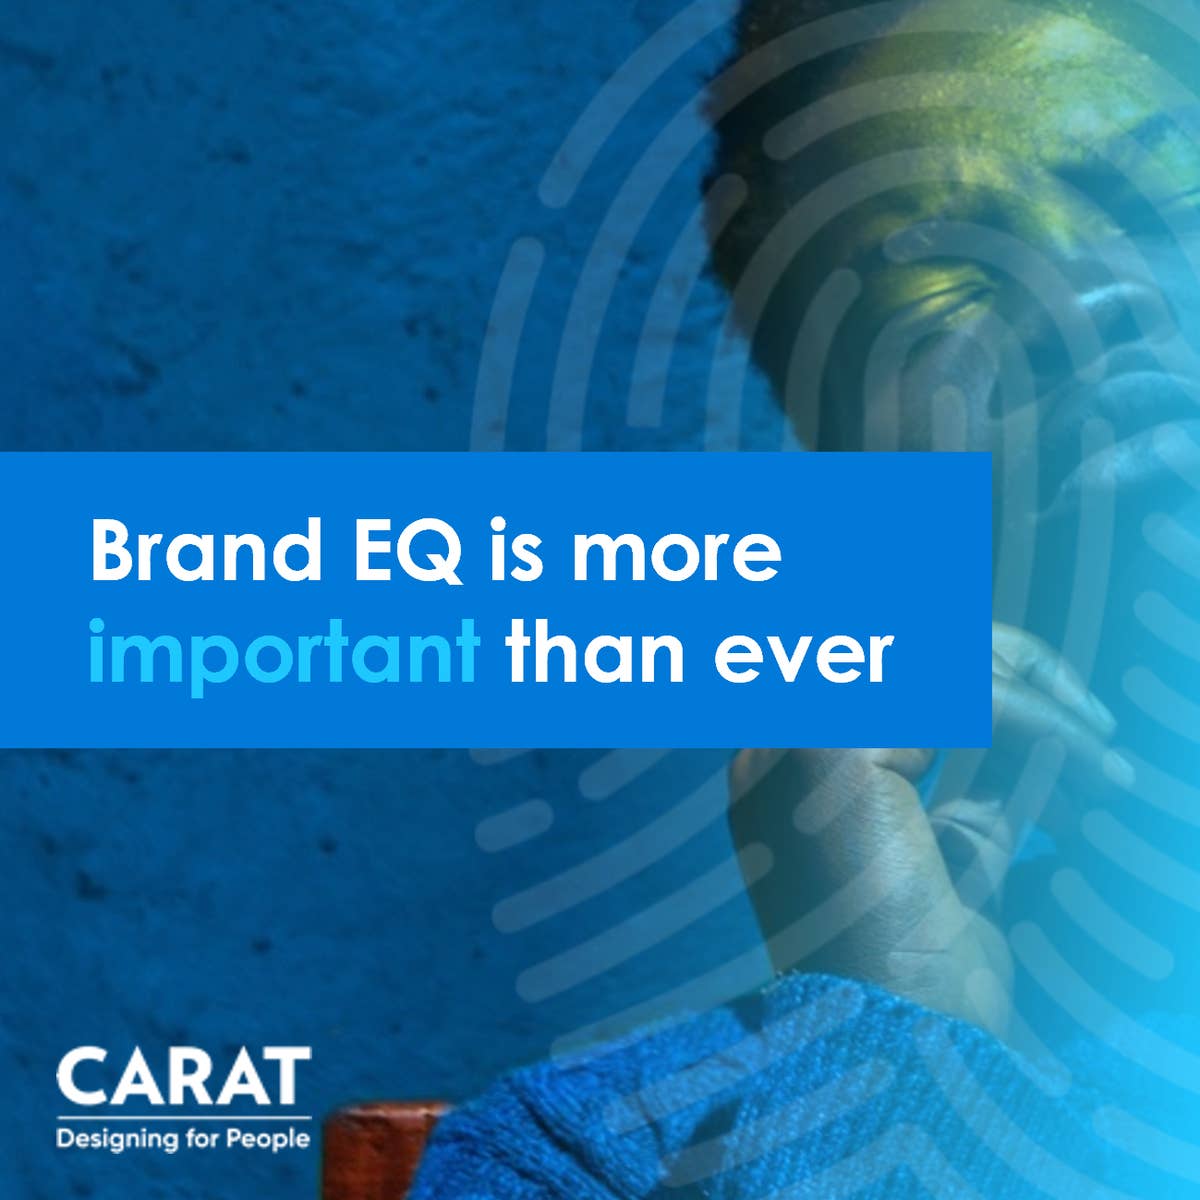 Brand EQ 2022 - More Emotionally Intelligent Brands Grow More Quickly